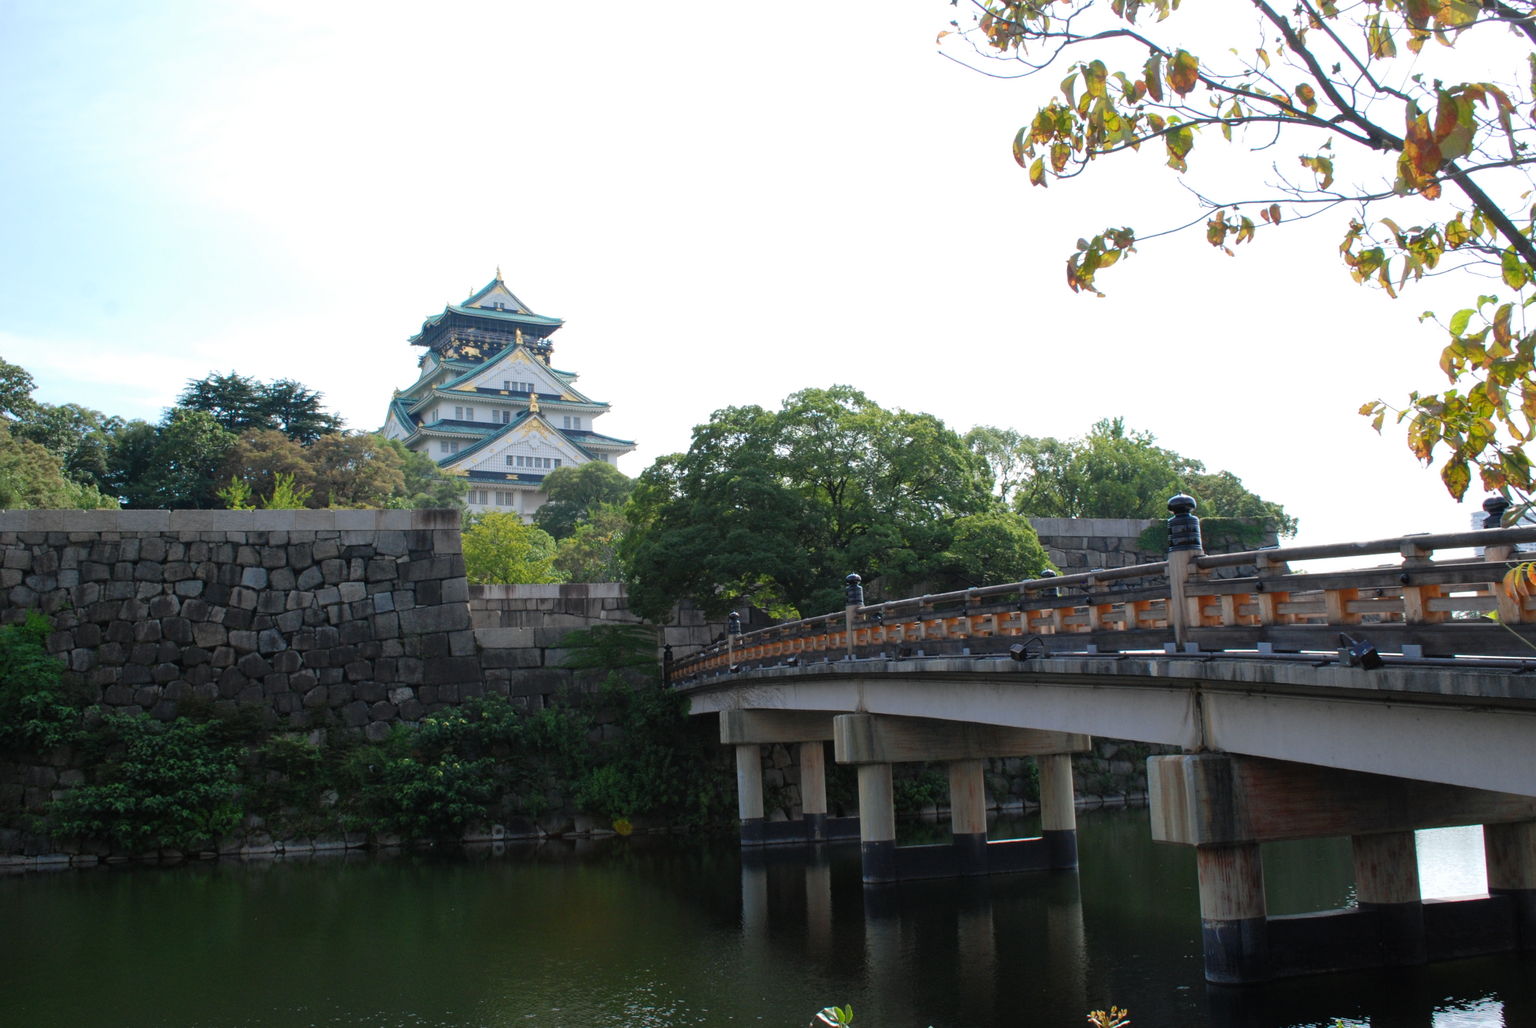 Osaka castle from the distance